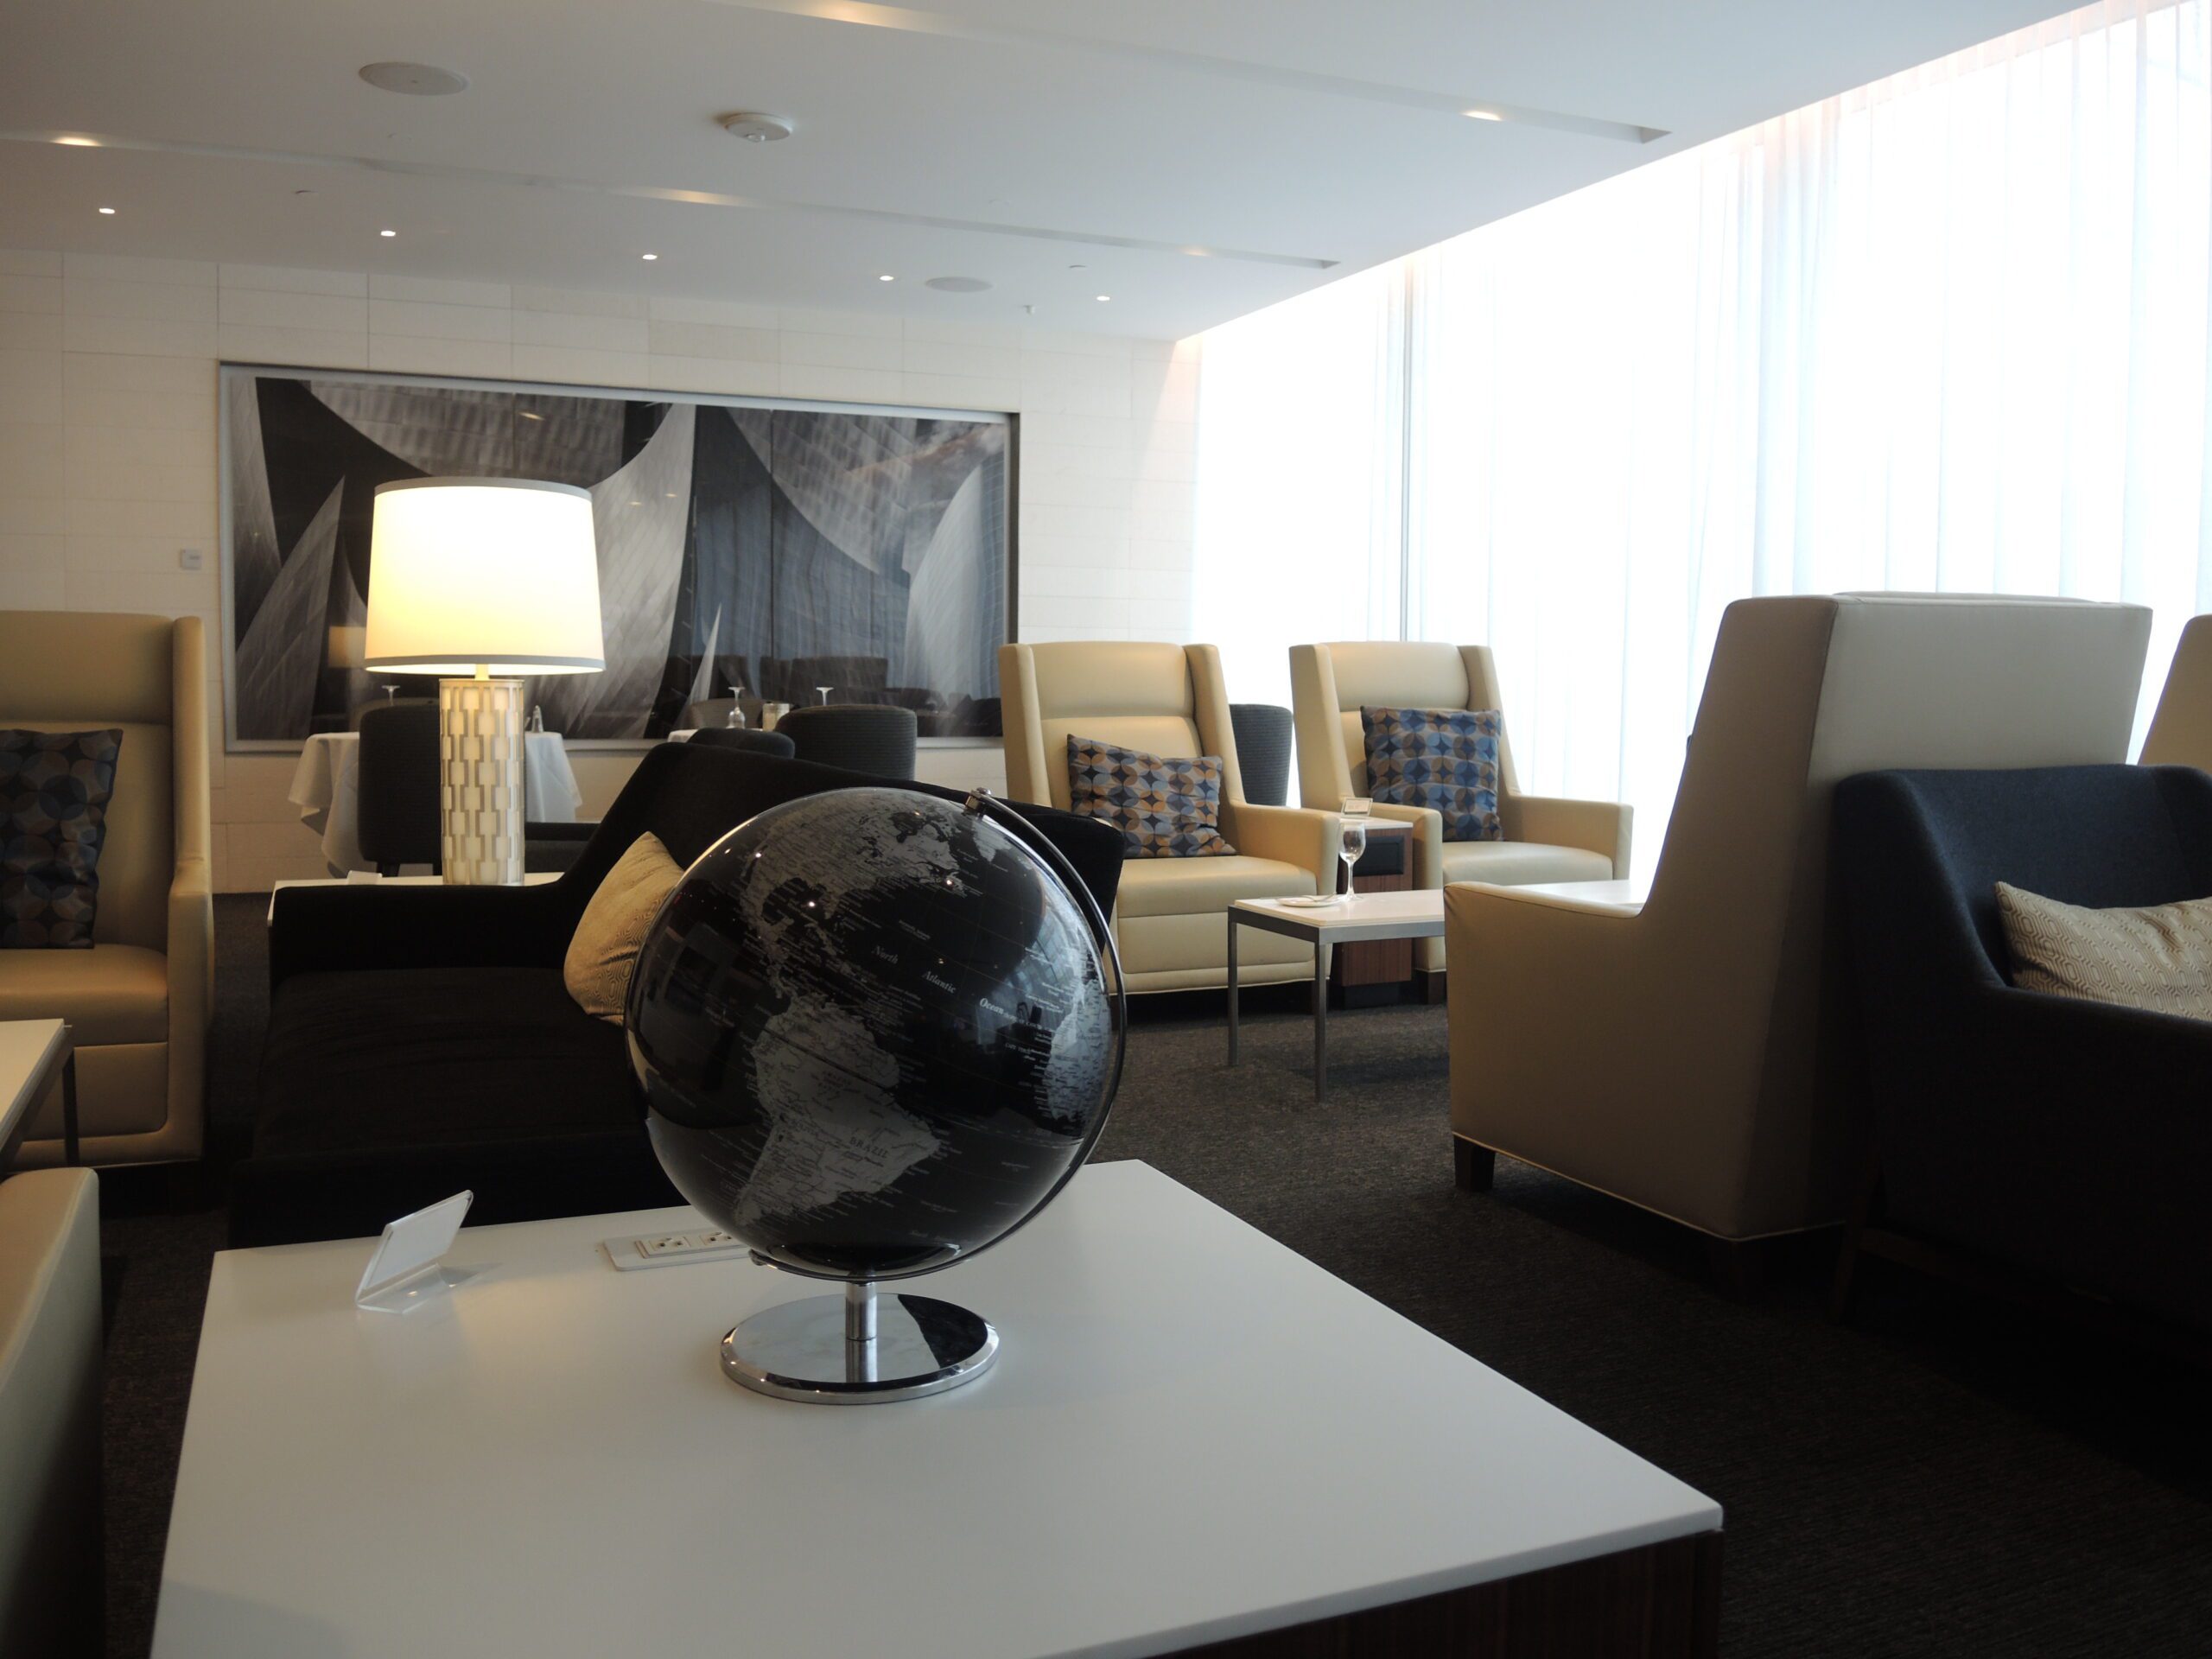 a globe on a table in a room